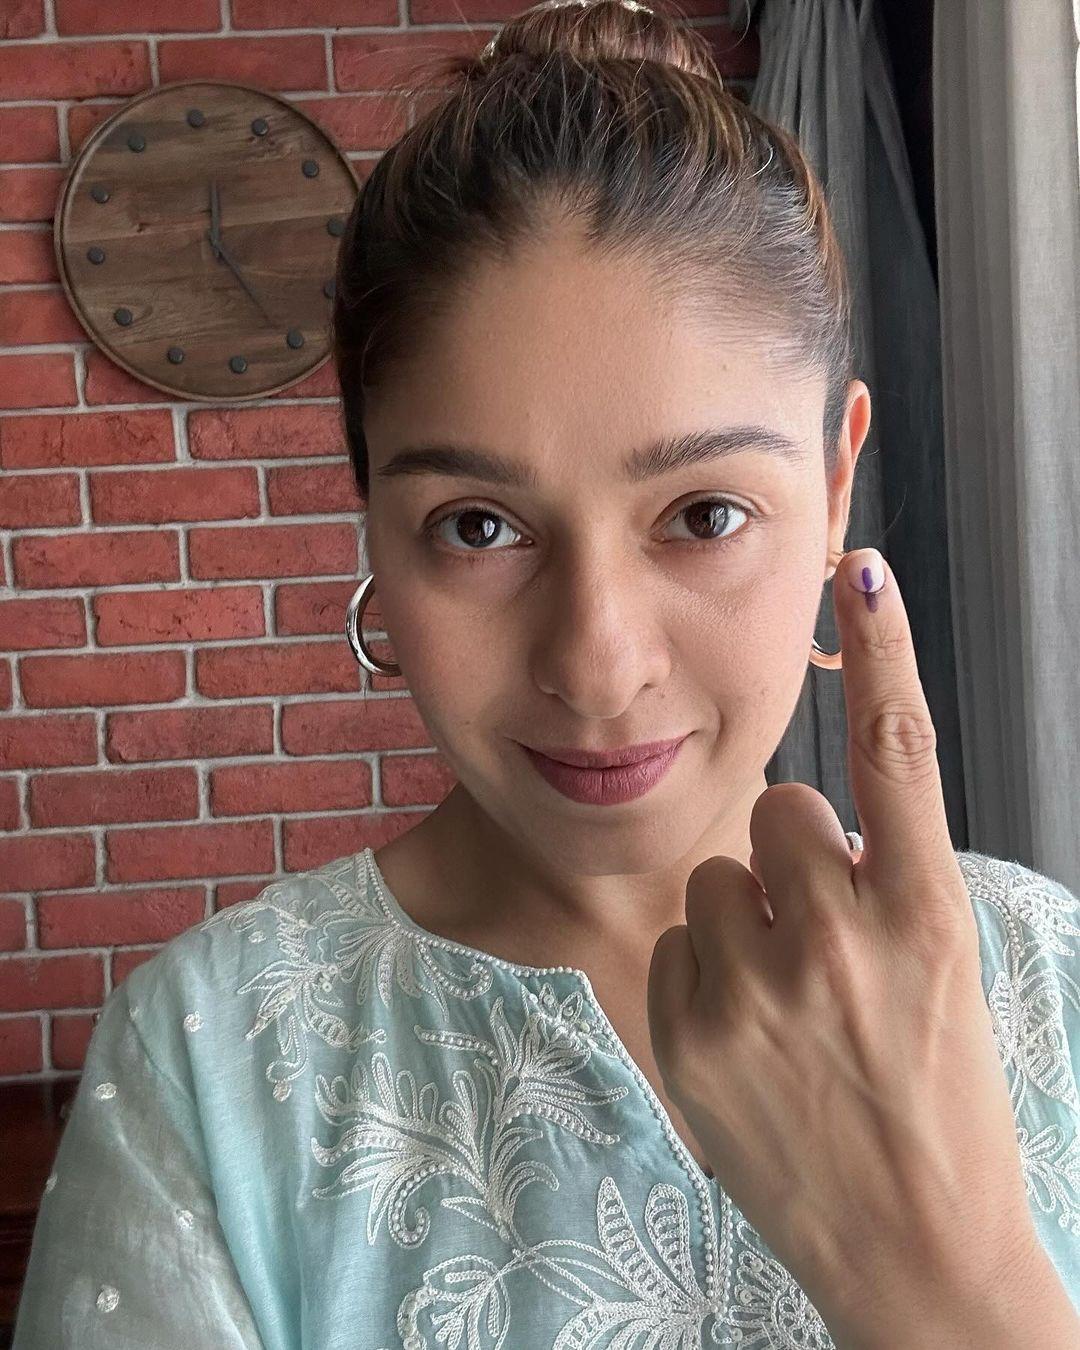 Sunidhi Chauhan also dropped a selfie as she urged public to vote in the fifth phase of Lok Sabha elections